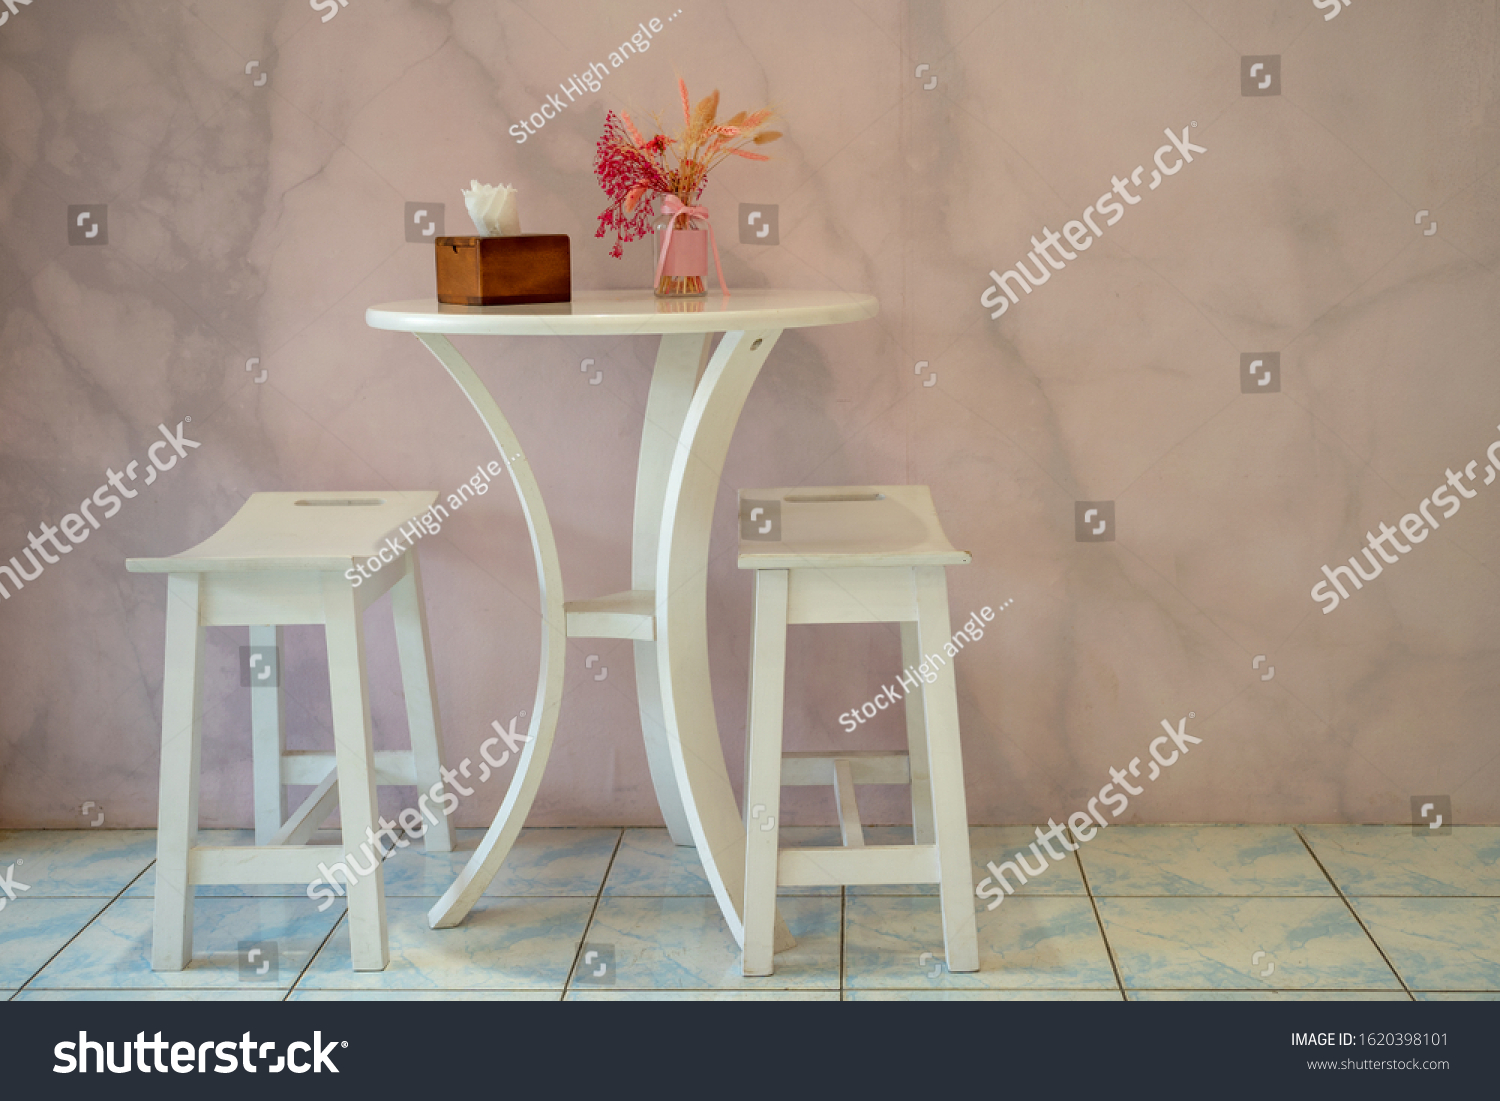 Two white wooden chairs with table and flower in vase modern interior with modern wall background #1620398101